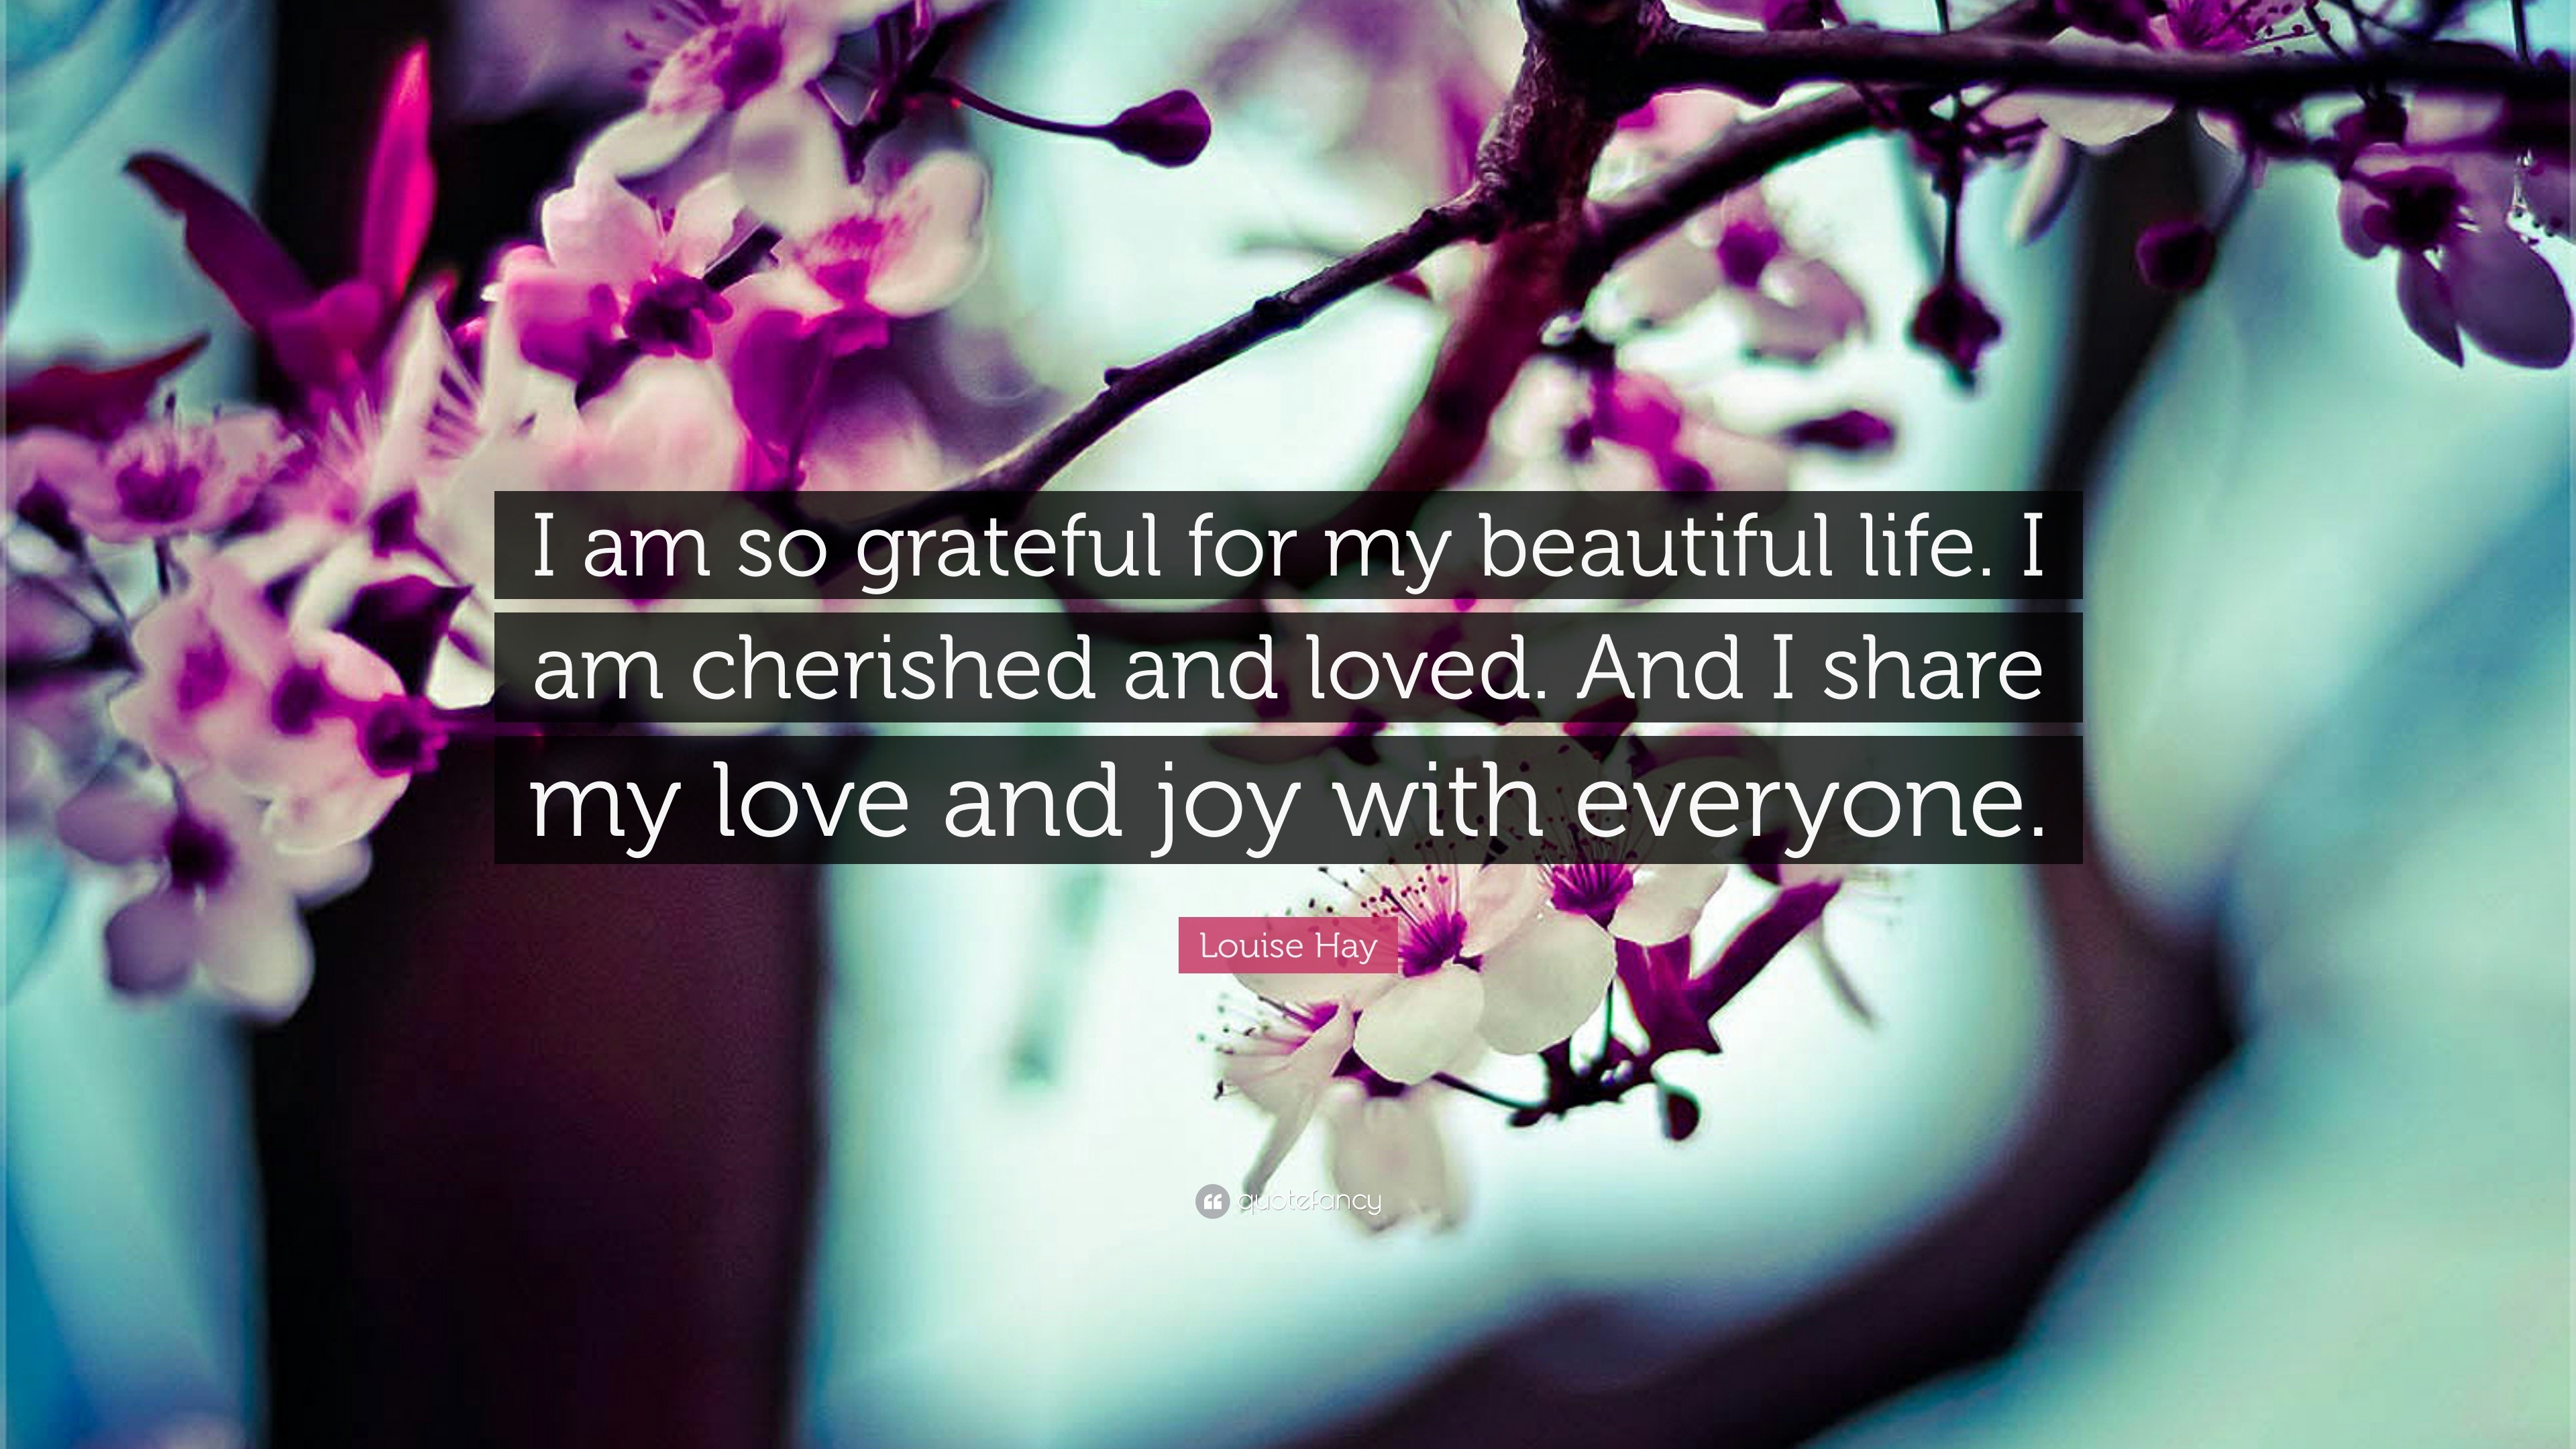 Louise Hay Quote “I am so grateful for my beautiful life I am